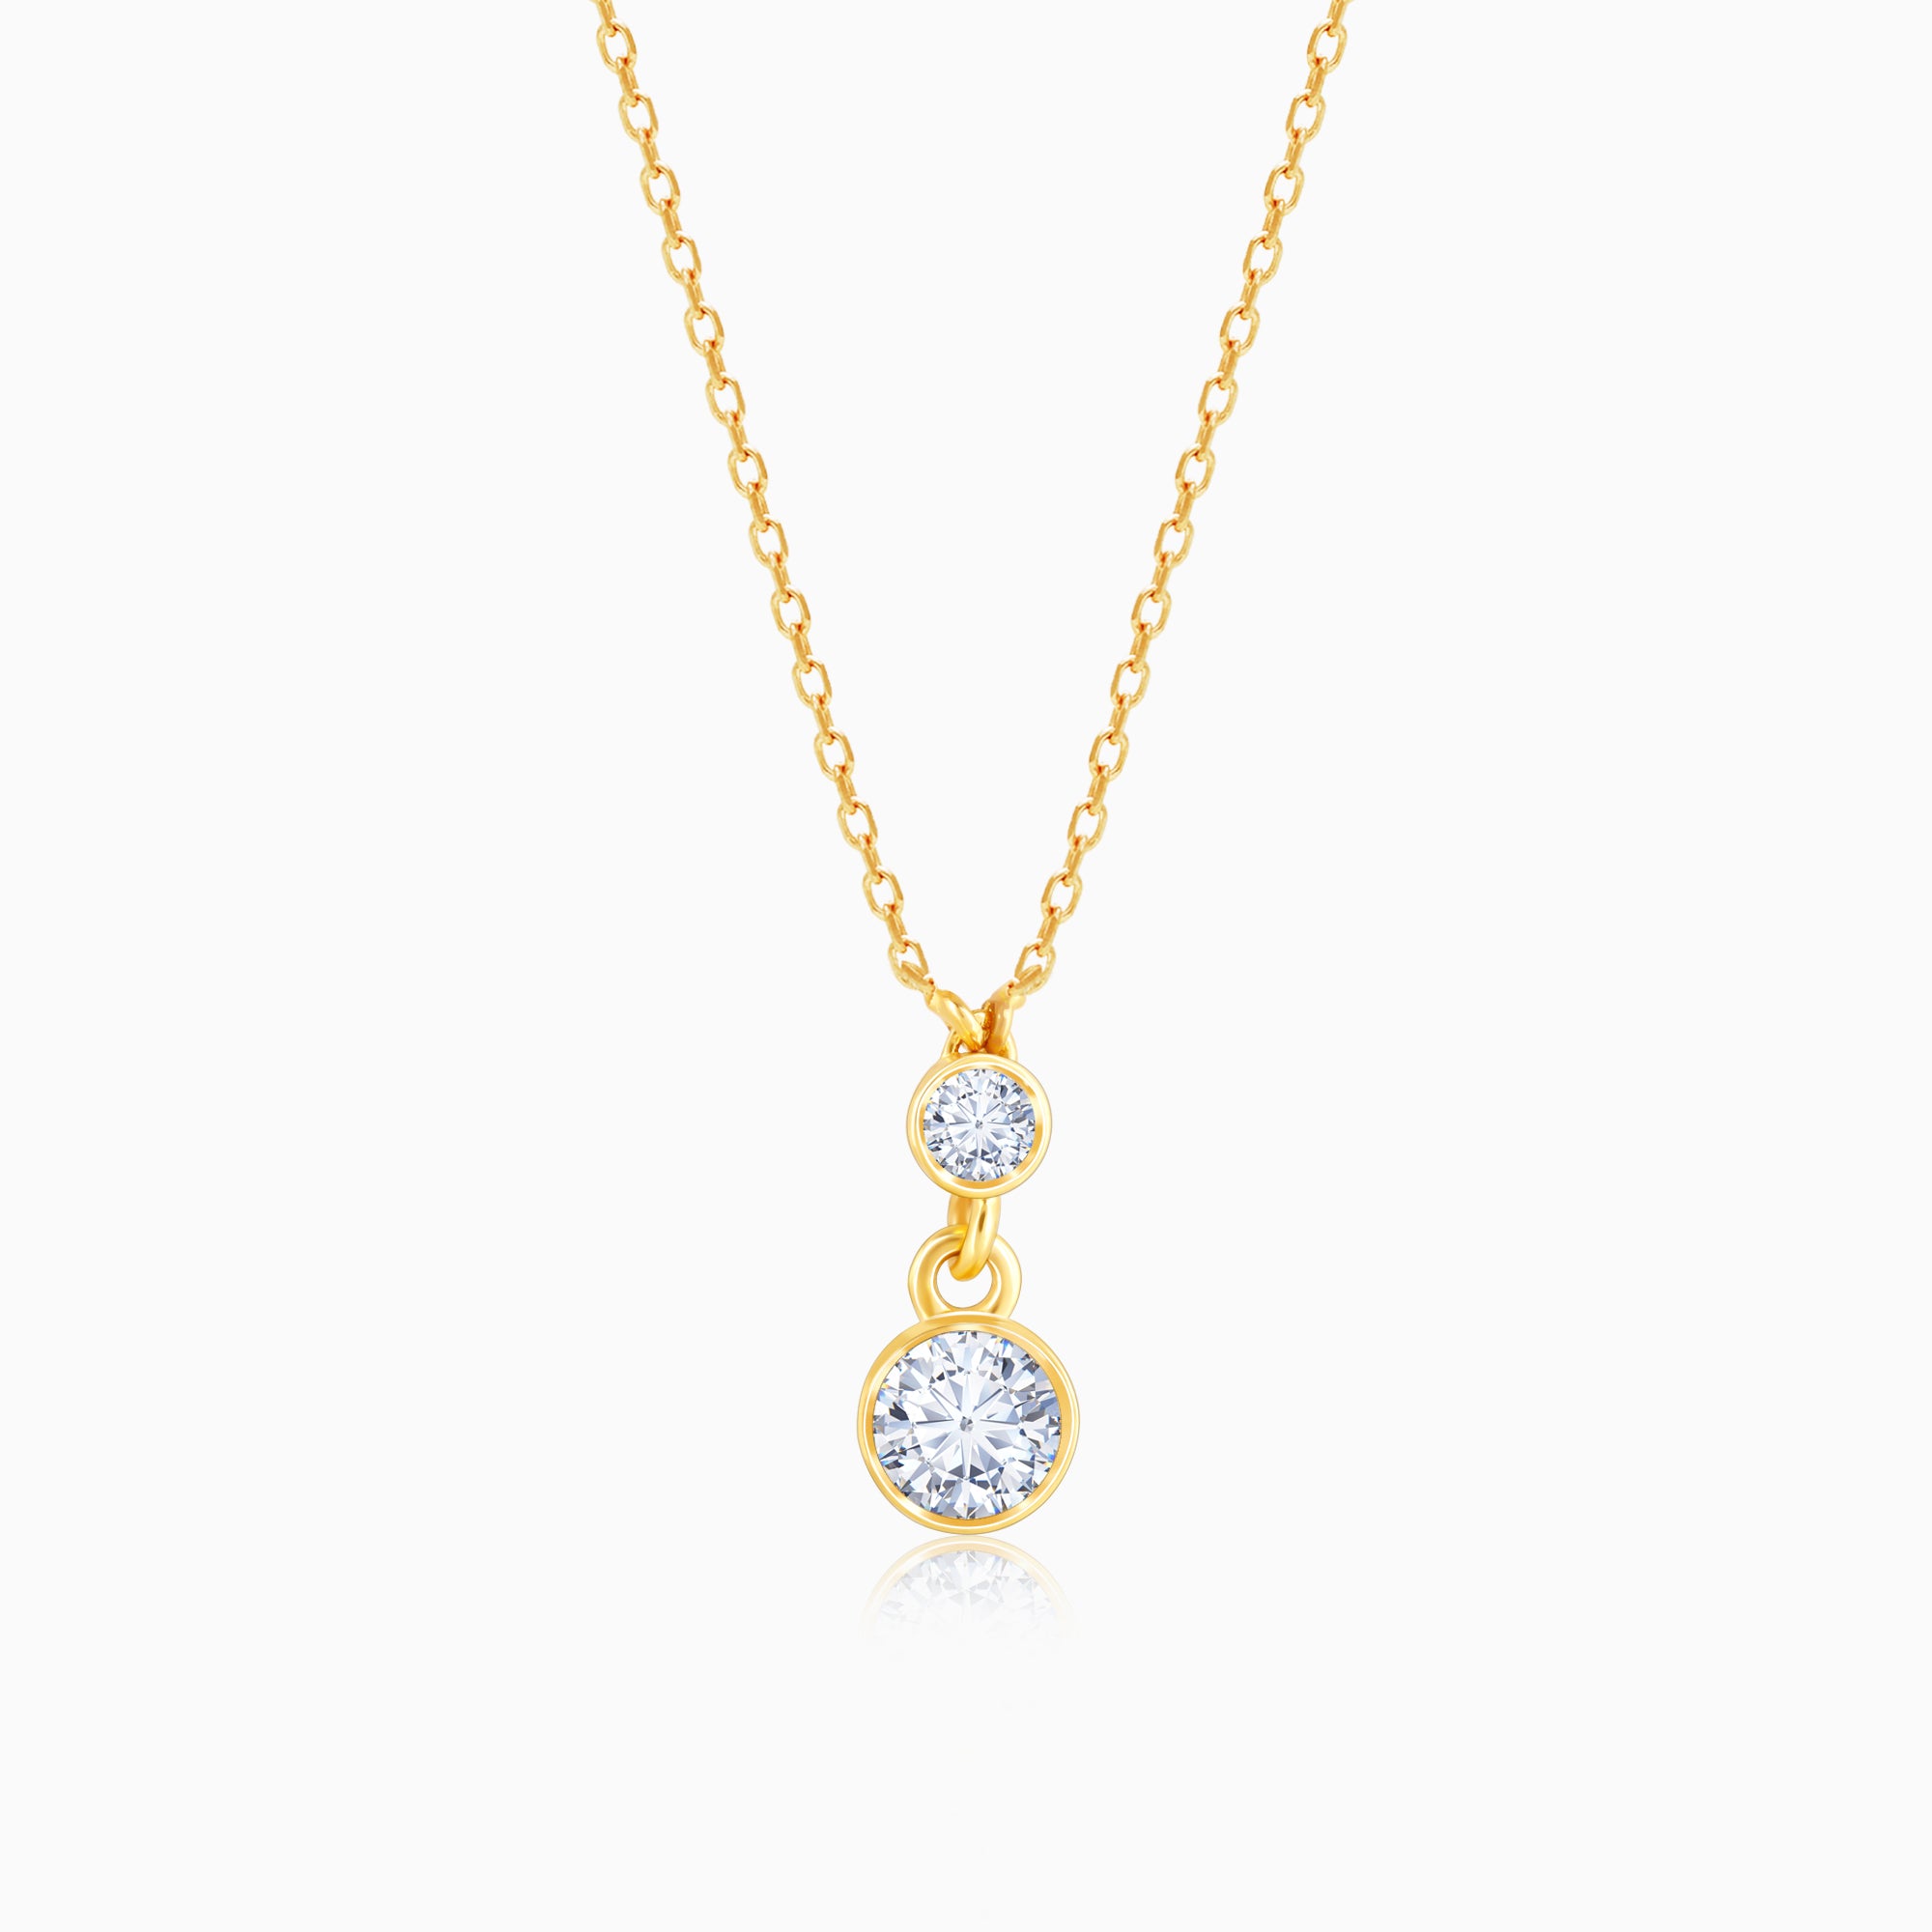 Buy Classic Trio Diamond Necklace / 14k Gold Diamond Necklace 0.26 Ctw /  Past Present Future / Prong Setting 3 Stone / Gift for Mom Online in India  - Etsy